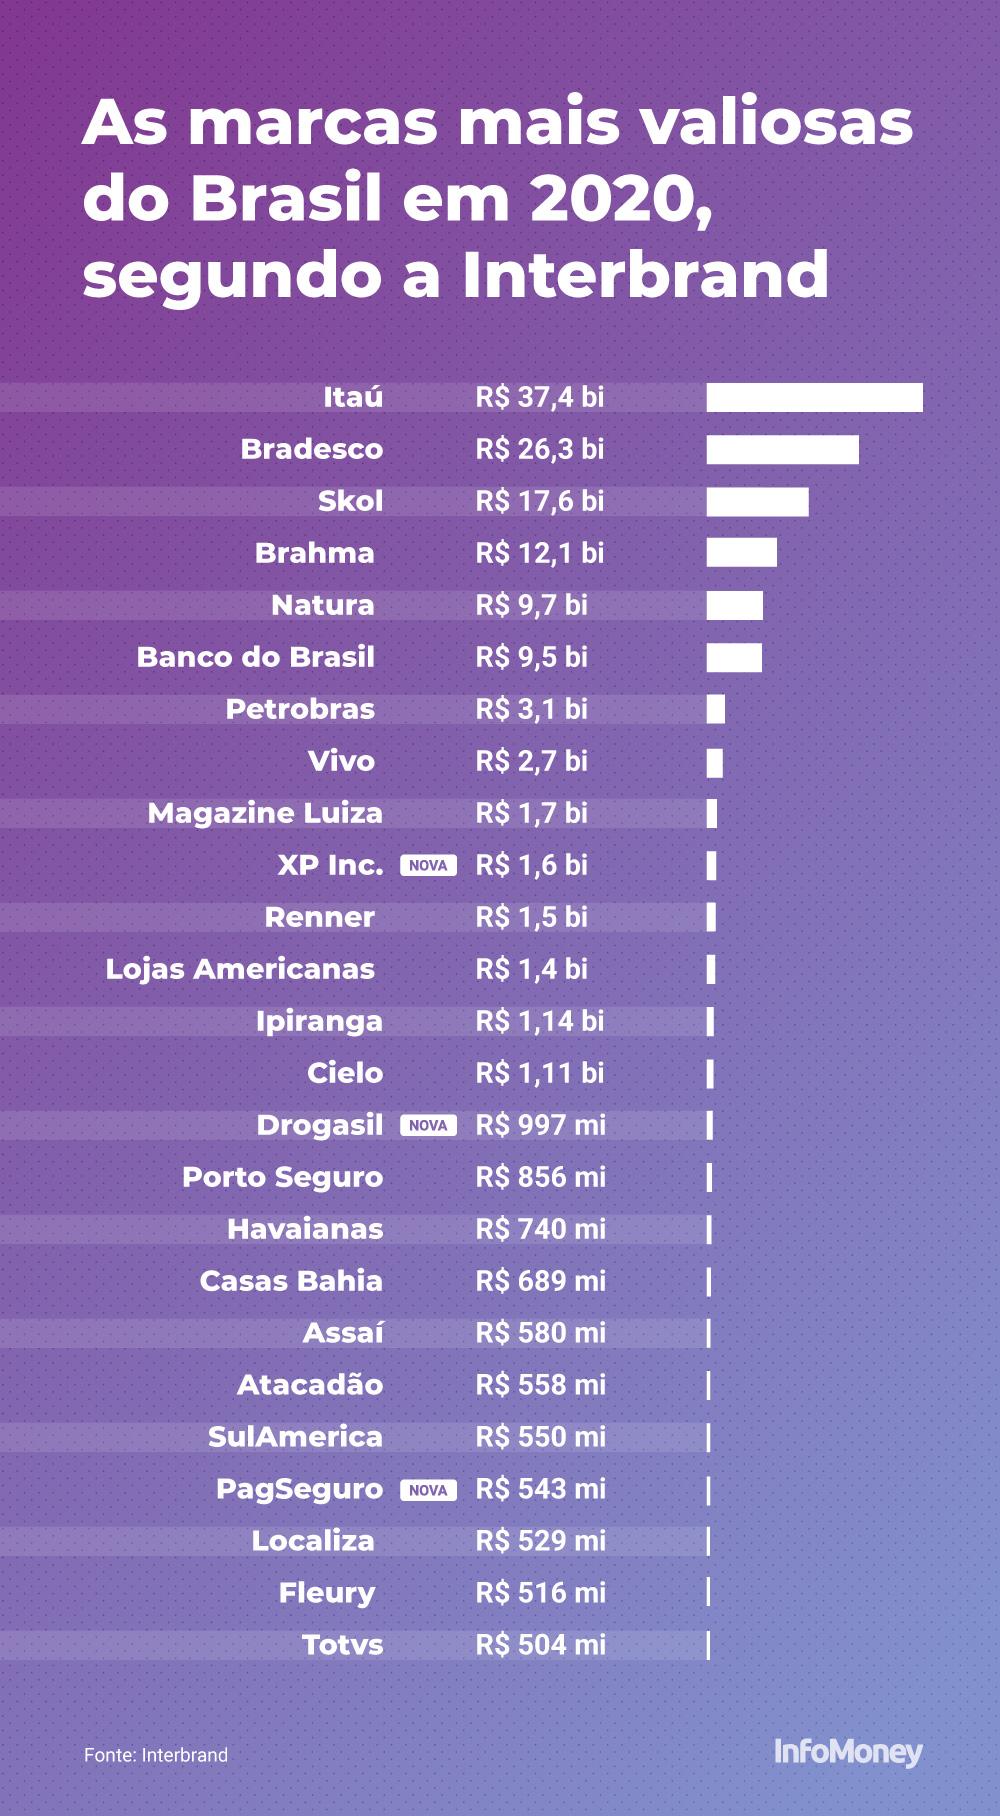 Interbrand, a global brand consultancy, released its annual ranking of the 25 most valuable brands in Brazil. The first placed was Itaú bank, with a brand value of R$37.4 (US7.4) billion, followed by Bradesco, whose brand is worth R$26.3 billion, and Skol, of Ambev group, which is worth R$17.6 billion.